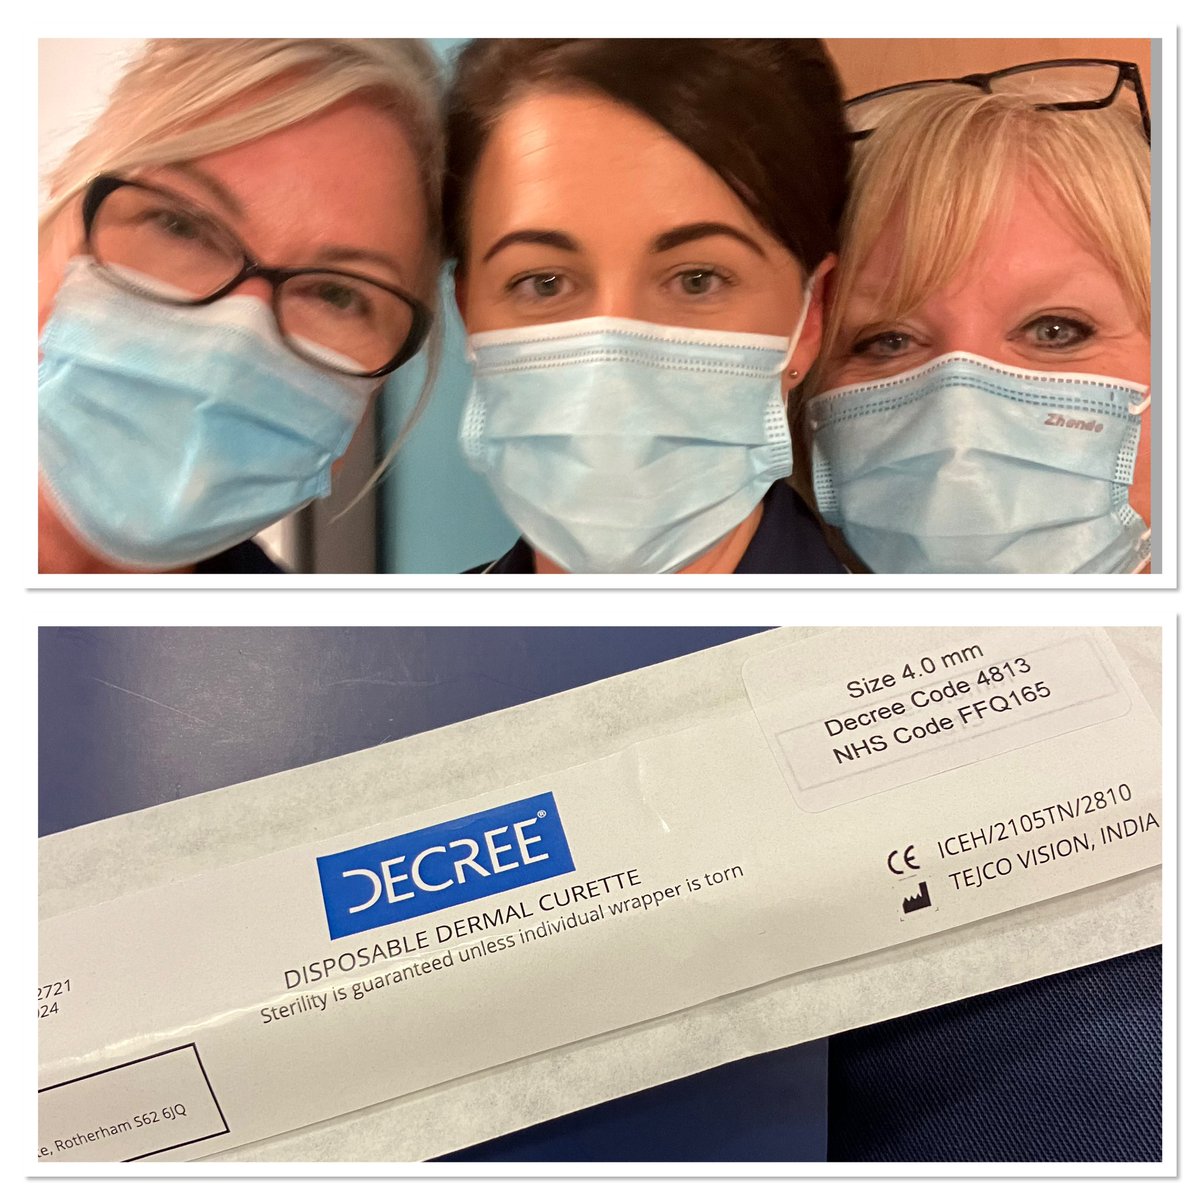 👏 Fantastic day with Vascular team in clinic today. Working alongside  superb team, thank you!!! 👏upskill in sharp debridement & much more….HUGE !! shout out to @Leannejane1975  for supporting me 1:1 through my clinical professional journey this year #collaborativework